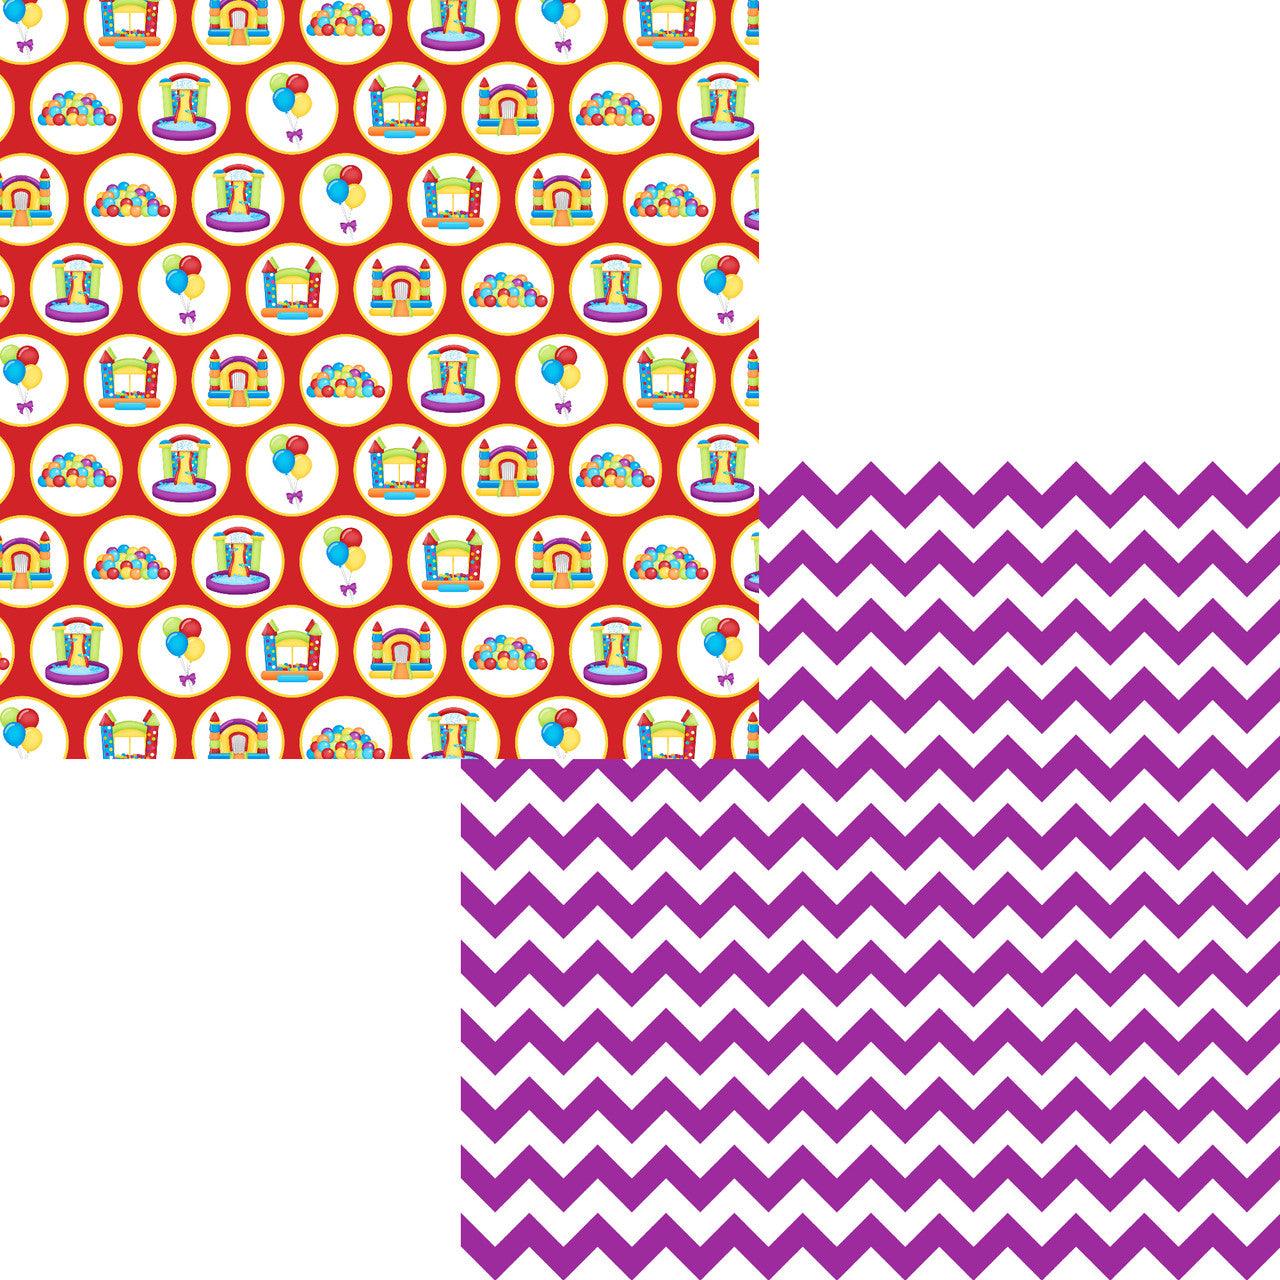 Bounce House Collection Bounce House & Balloons 12 x 12 Double-Sided Scrapbook Paper by SSC Designs - Scrapbook Supply Companies